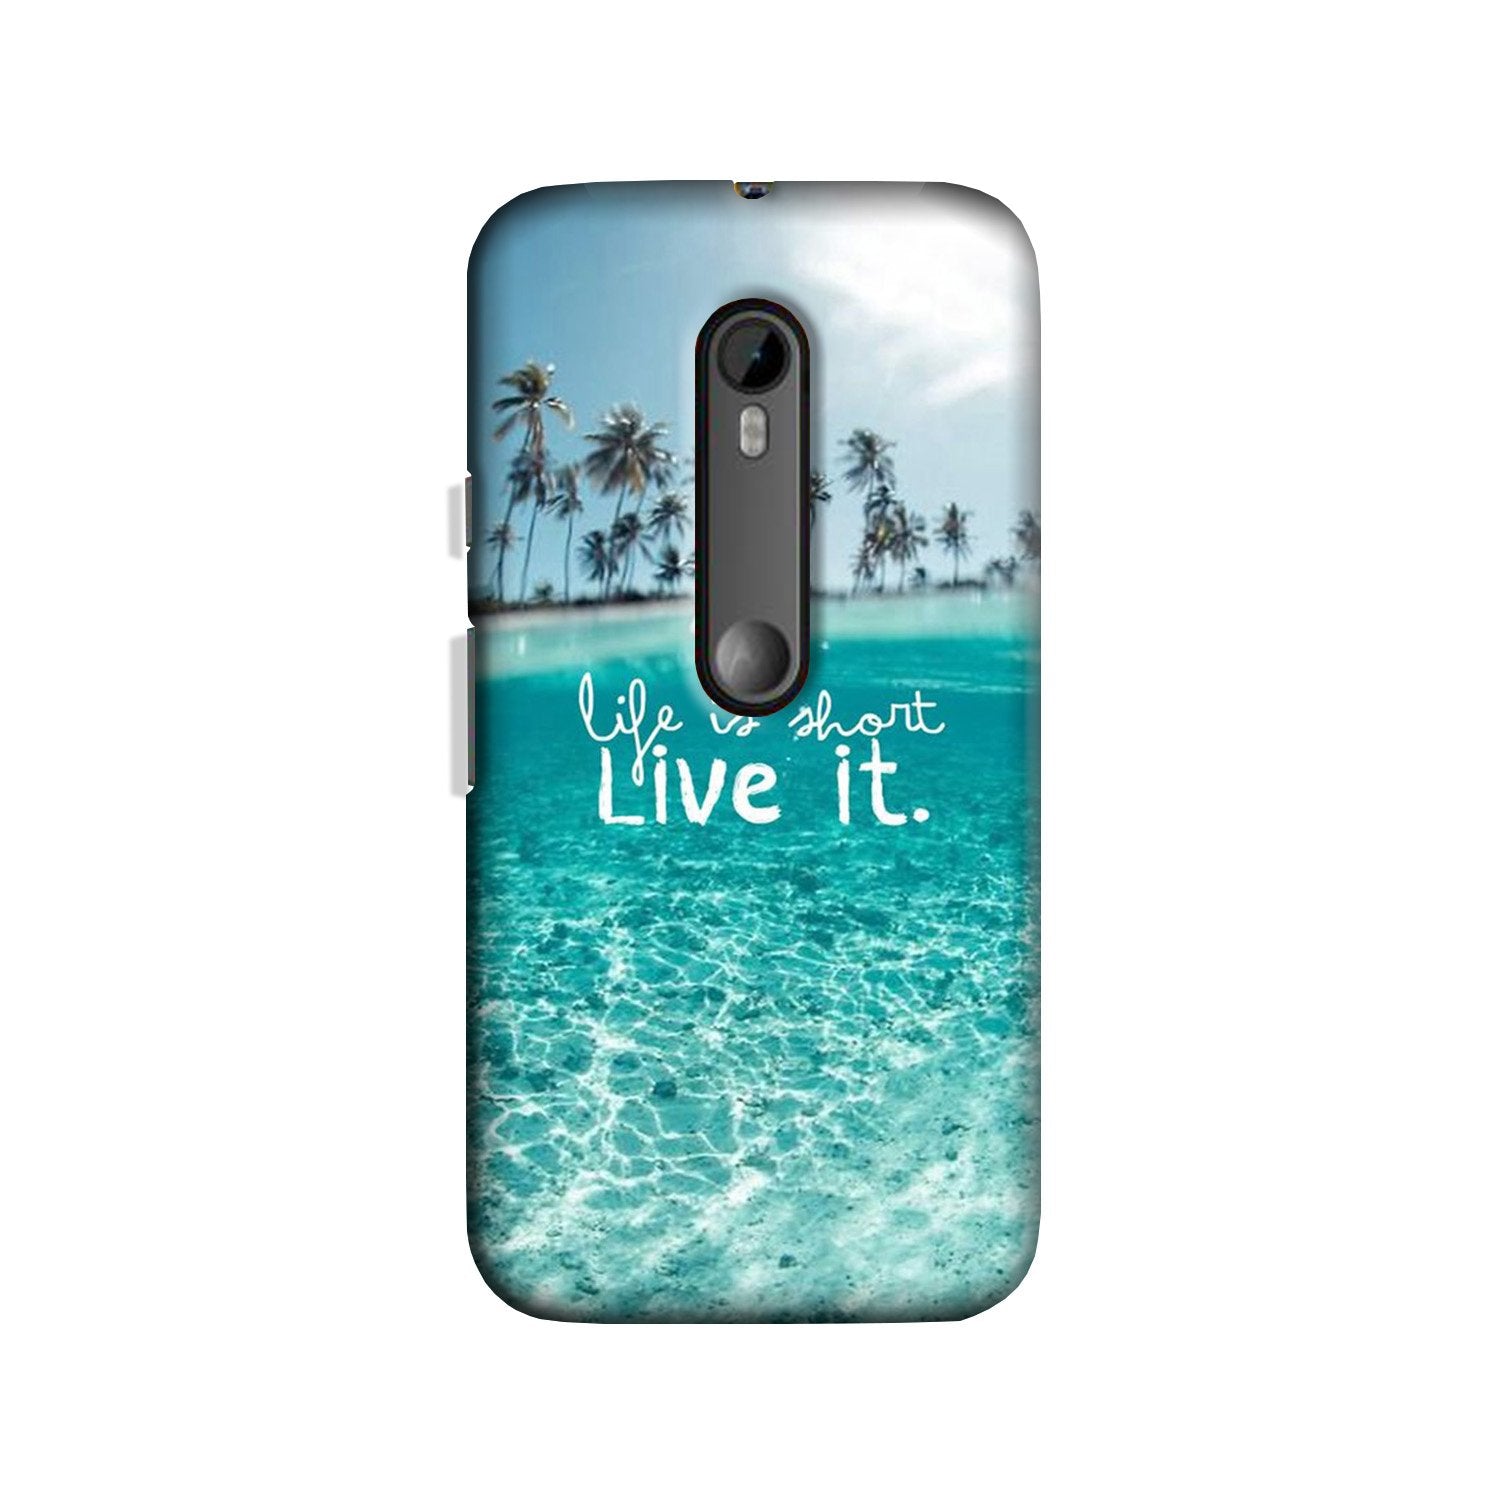 Life is short live it Case for Moto X Style